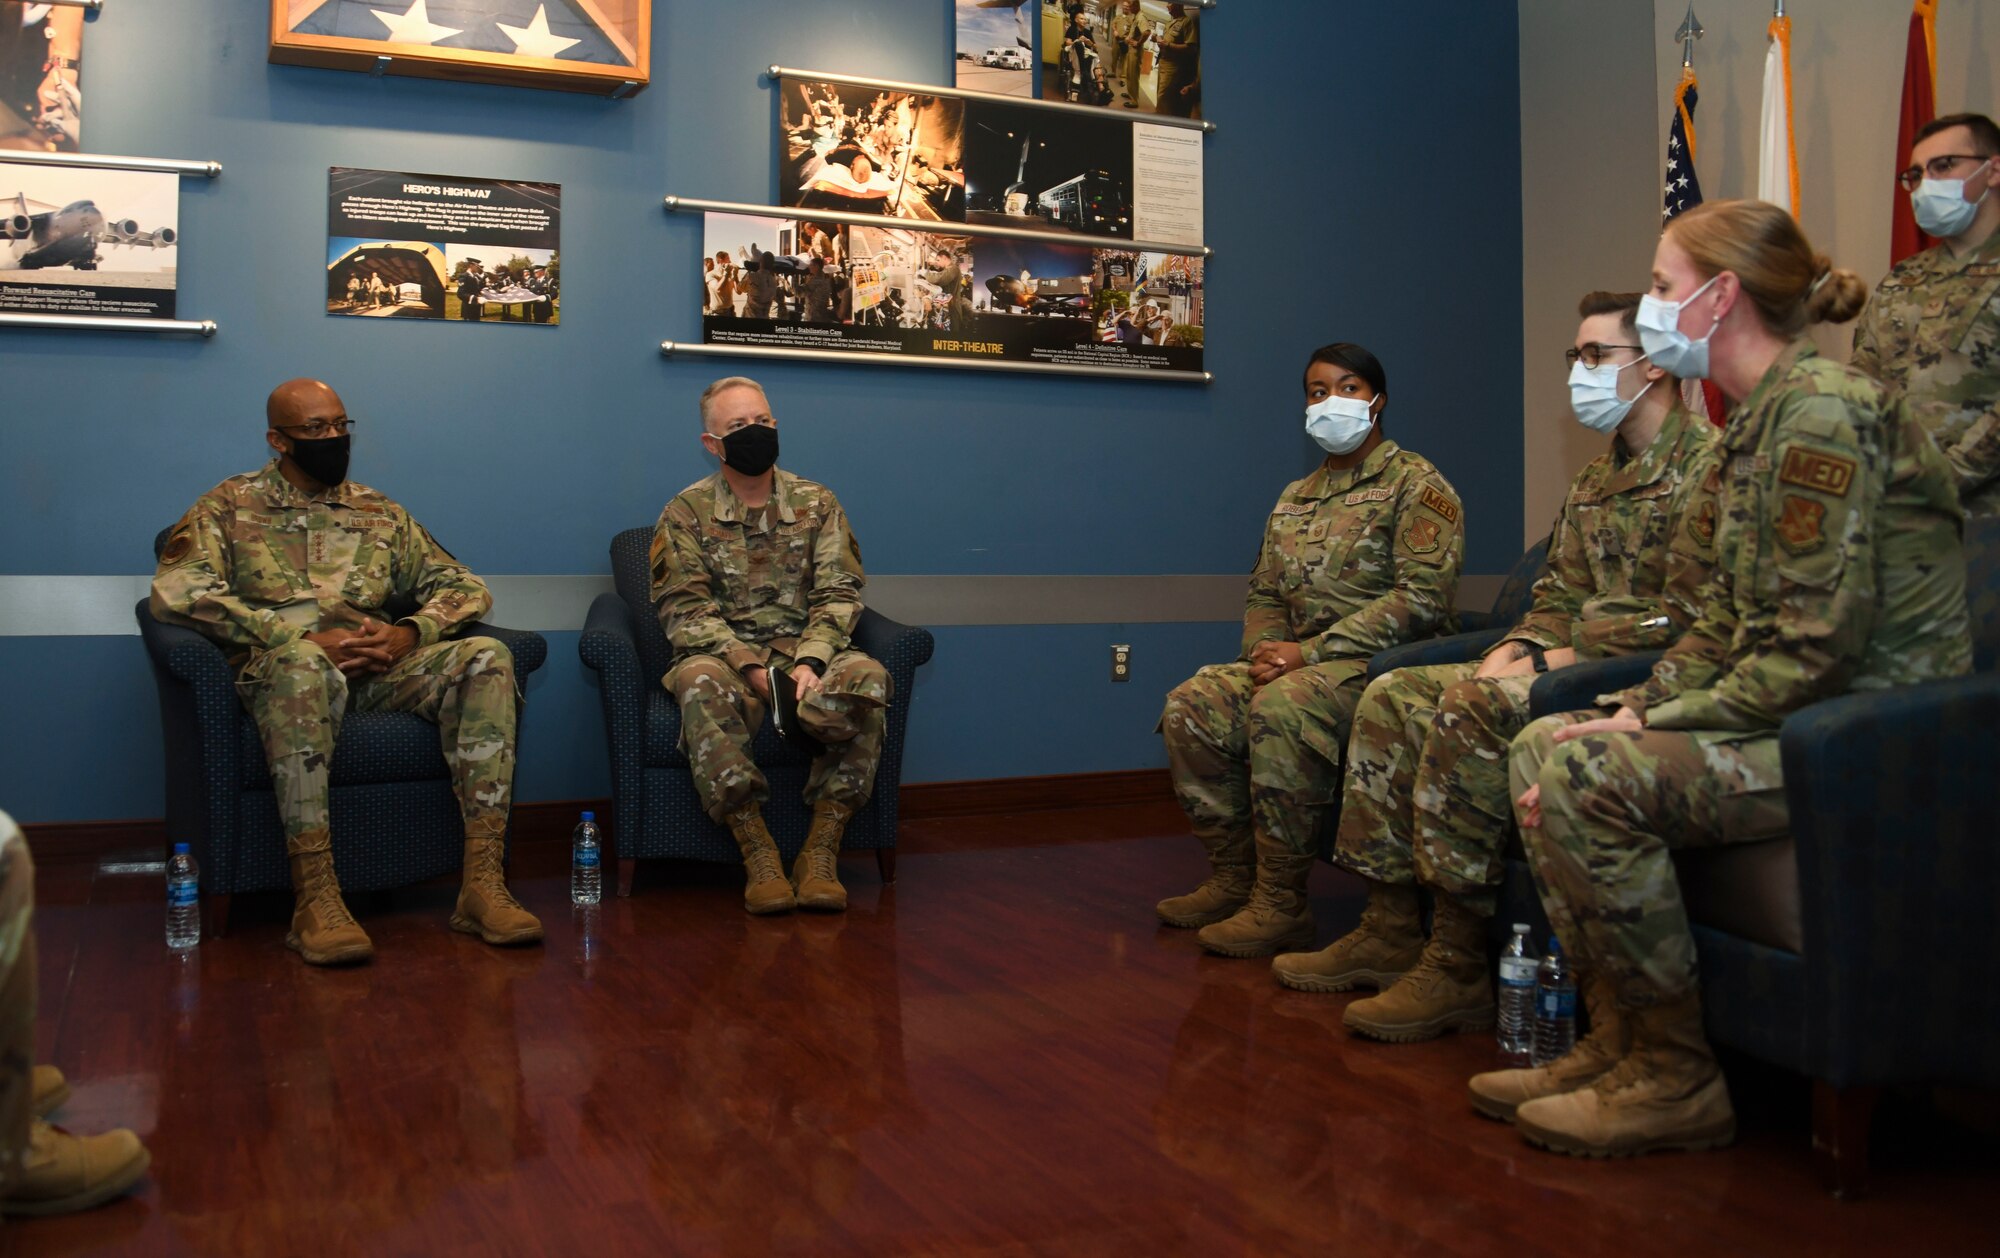 Air Force Chief of Staff Gen. CQ Brown, Jr., (left) listens to a brief about operations at the 316th Medical Group Aeromedical Staging Facility at Joint Base Andrews, Md., Nov. 17, 2021. The facility has many functions, including being a first stop for Department of Defense personnel who have been injured overseas in support of combat operations. (U.S. Air Force photo by Senior Airman Spencer Slocum)